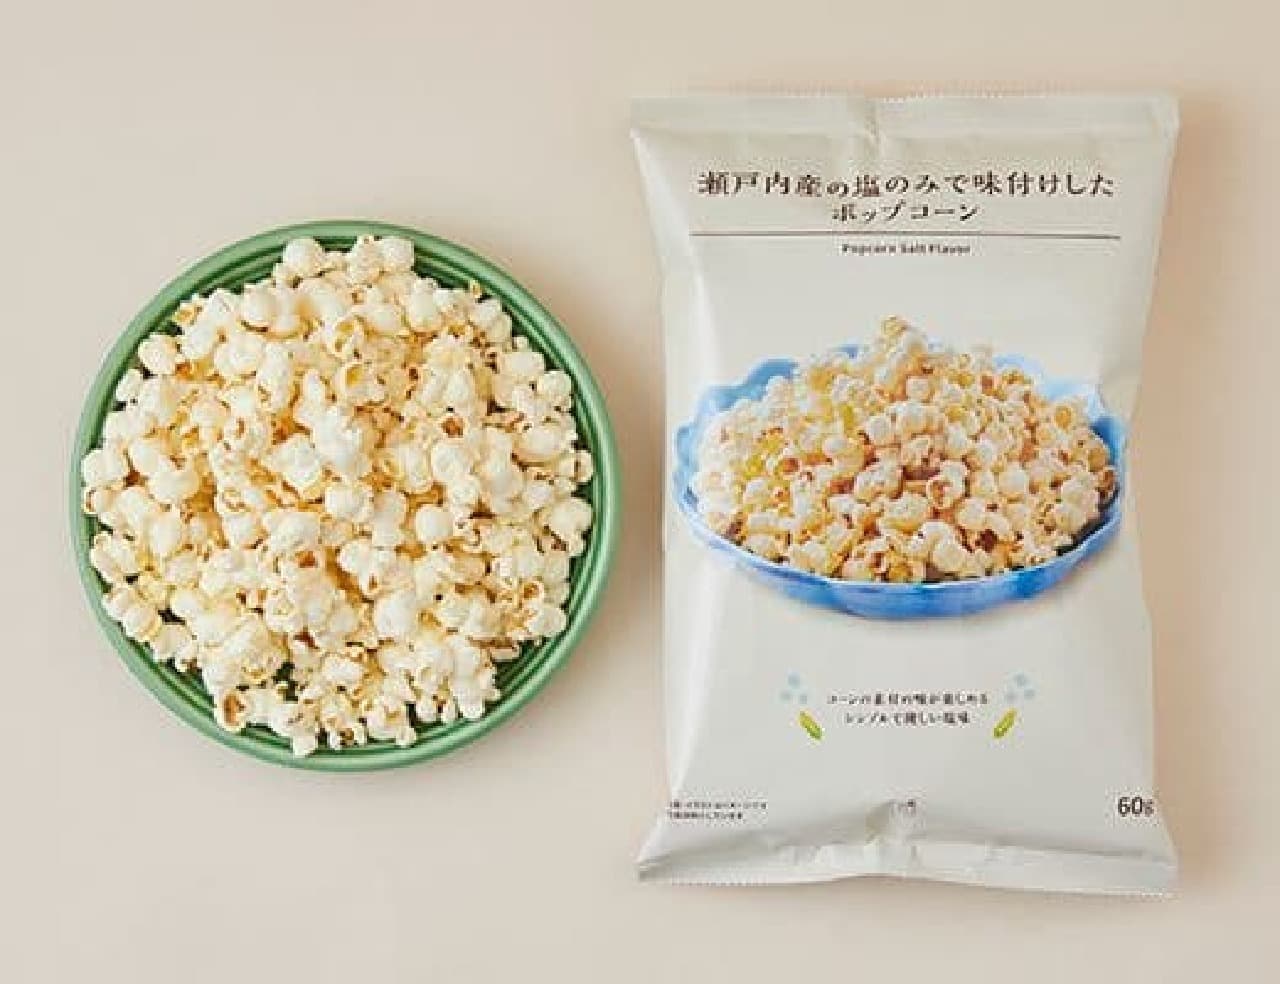 Lawson "Popcorn flavored only with salt from Setouchi, 60g"